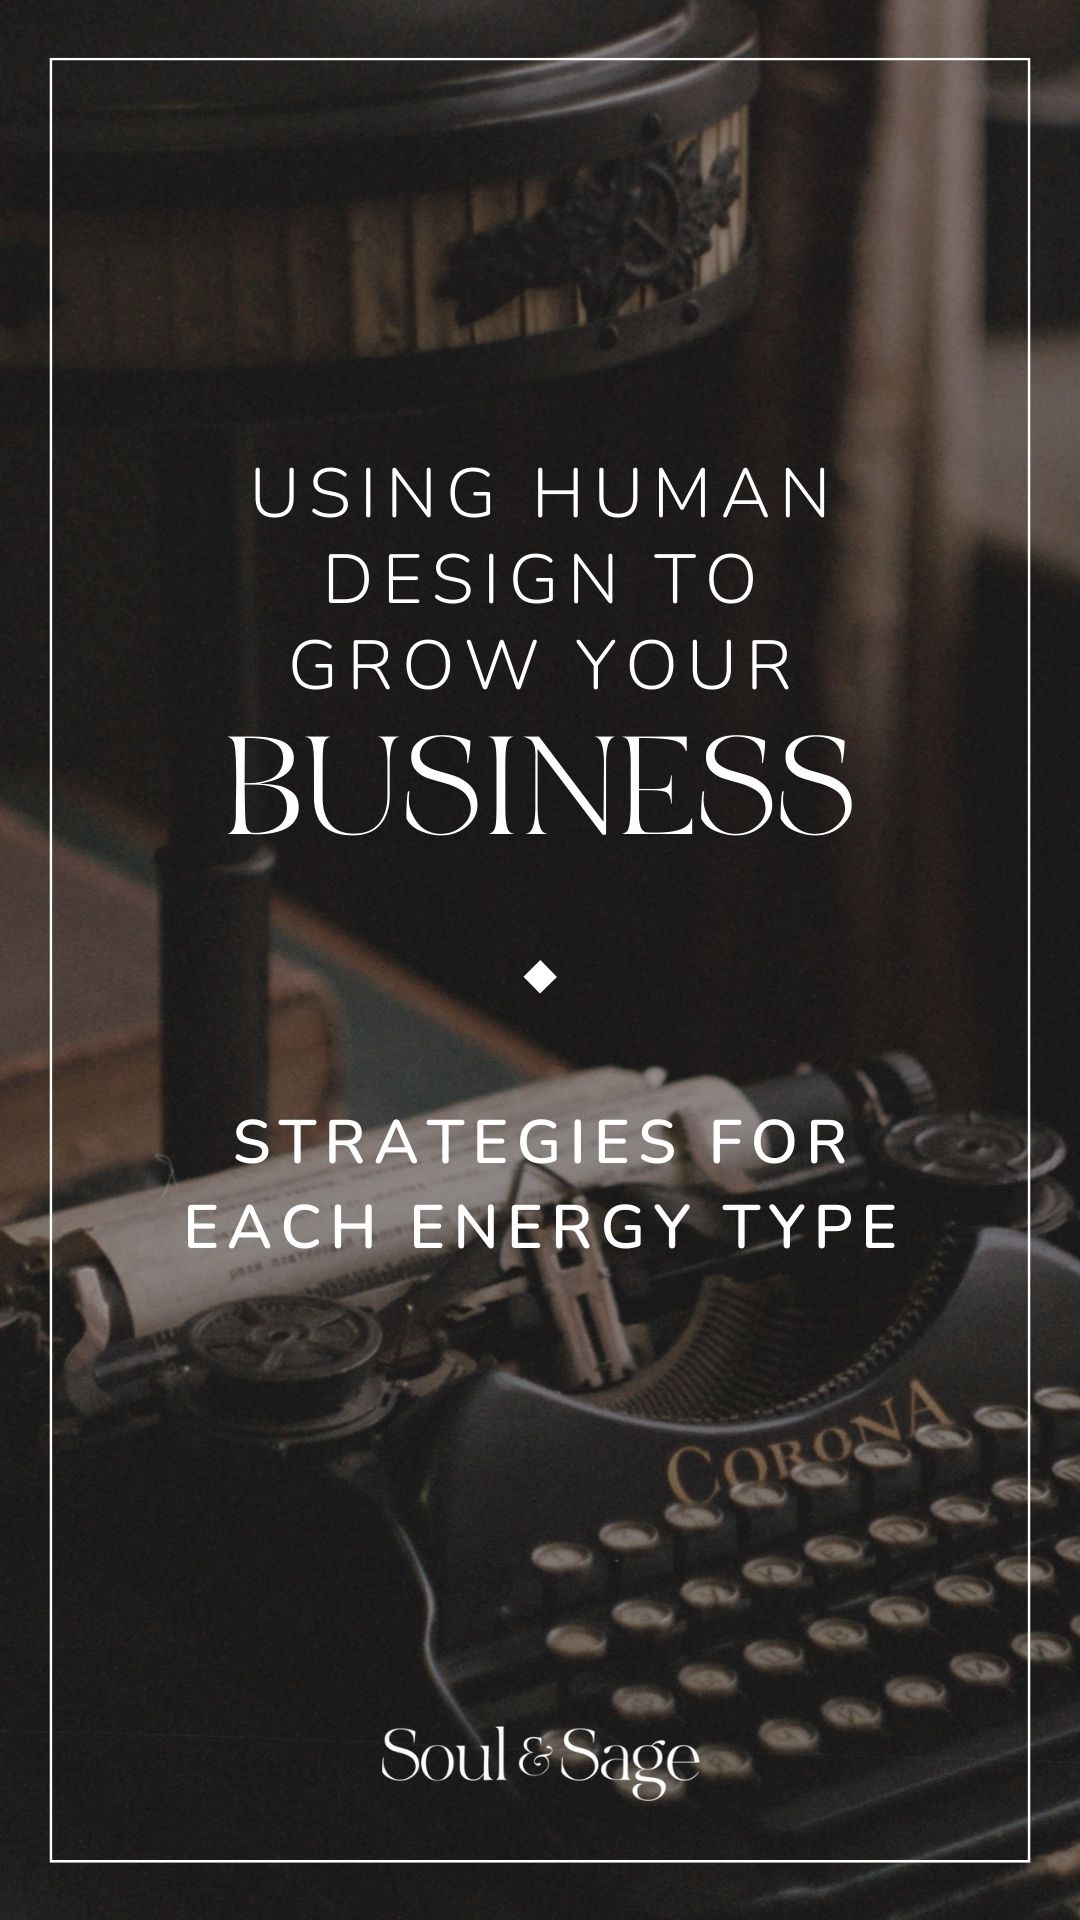 Use Human Design to Grow Your Business - Strategies for Each Energy Type